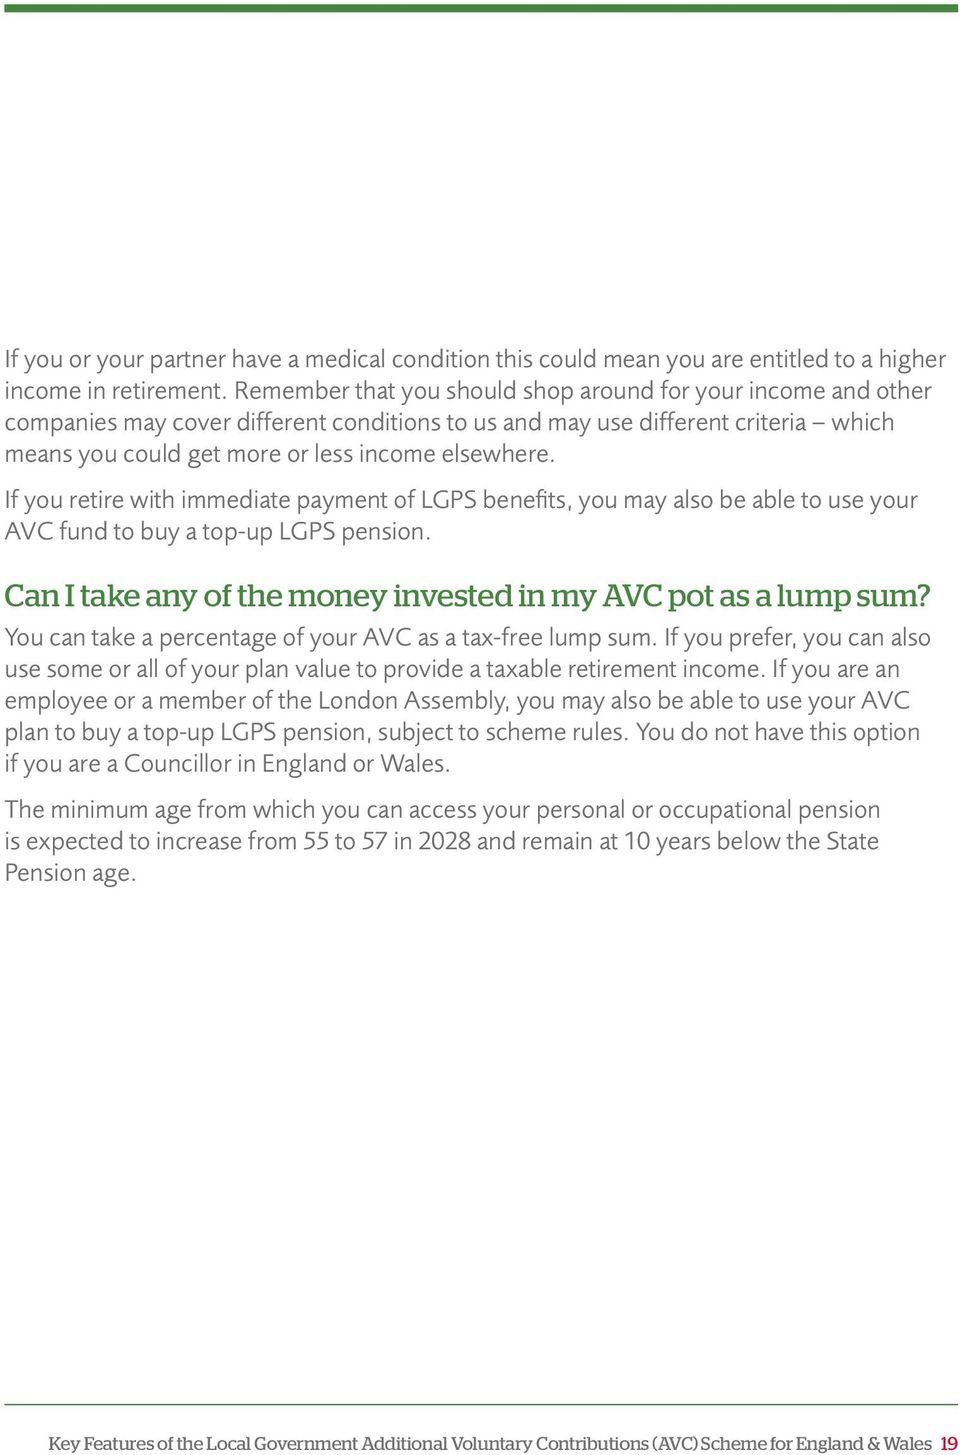 If you retire with immediate payment of LGPS benefits, you may also be able to use your AVC fund to buy a top-up LGPS pension. Can I take any of the money invested in my AVC pot as a lump sum?